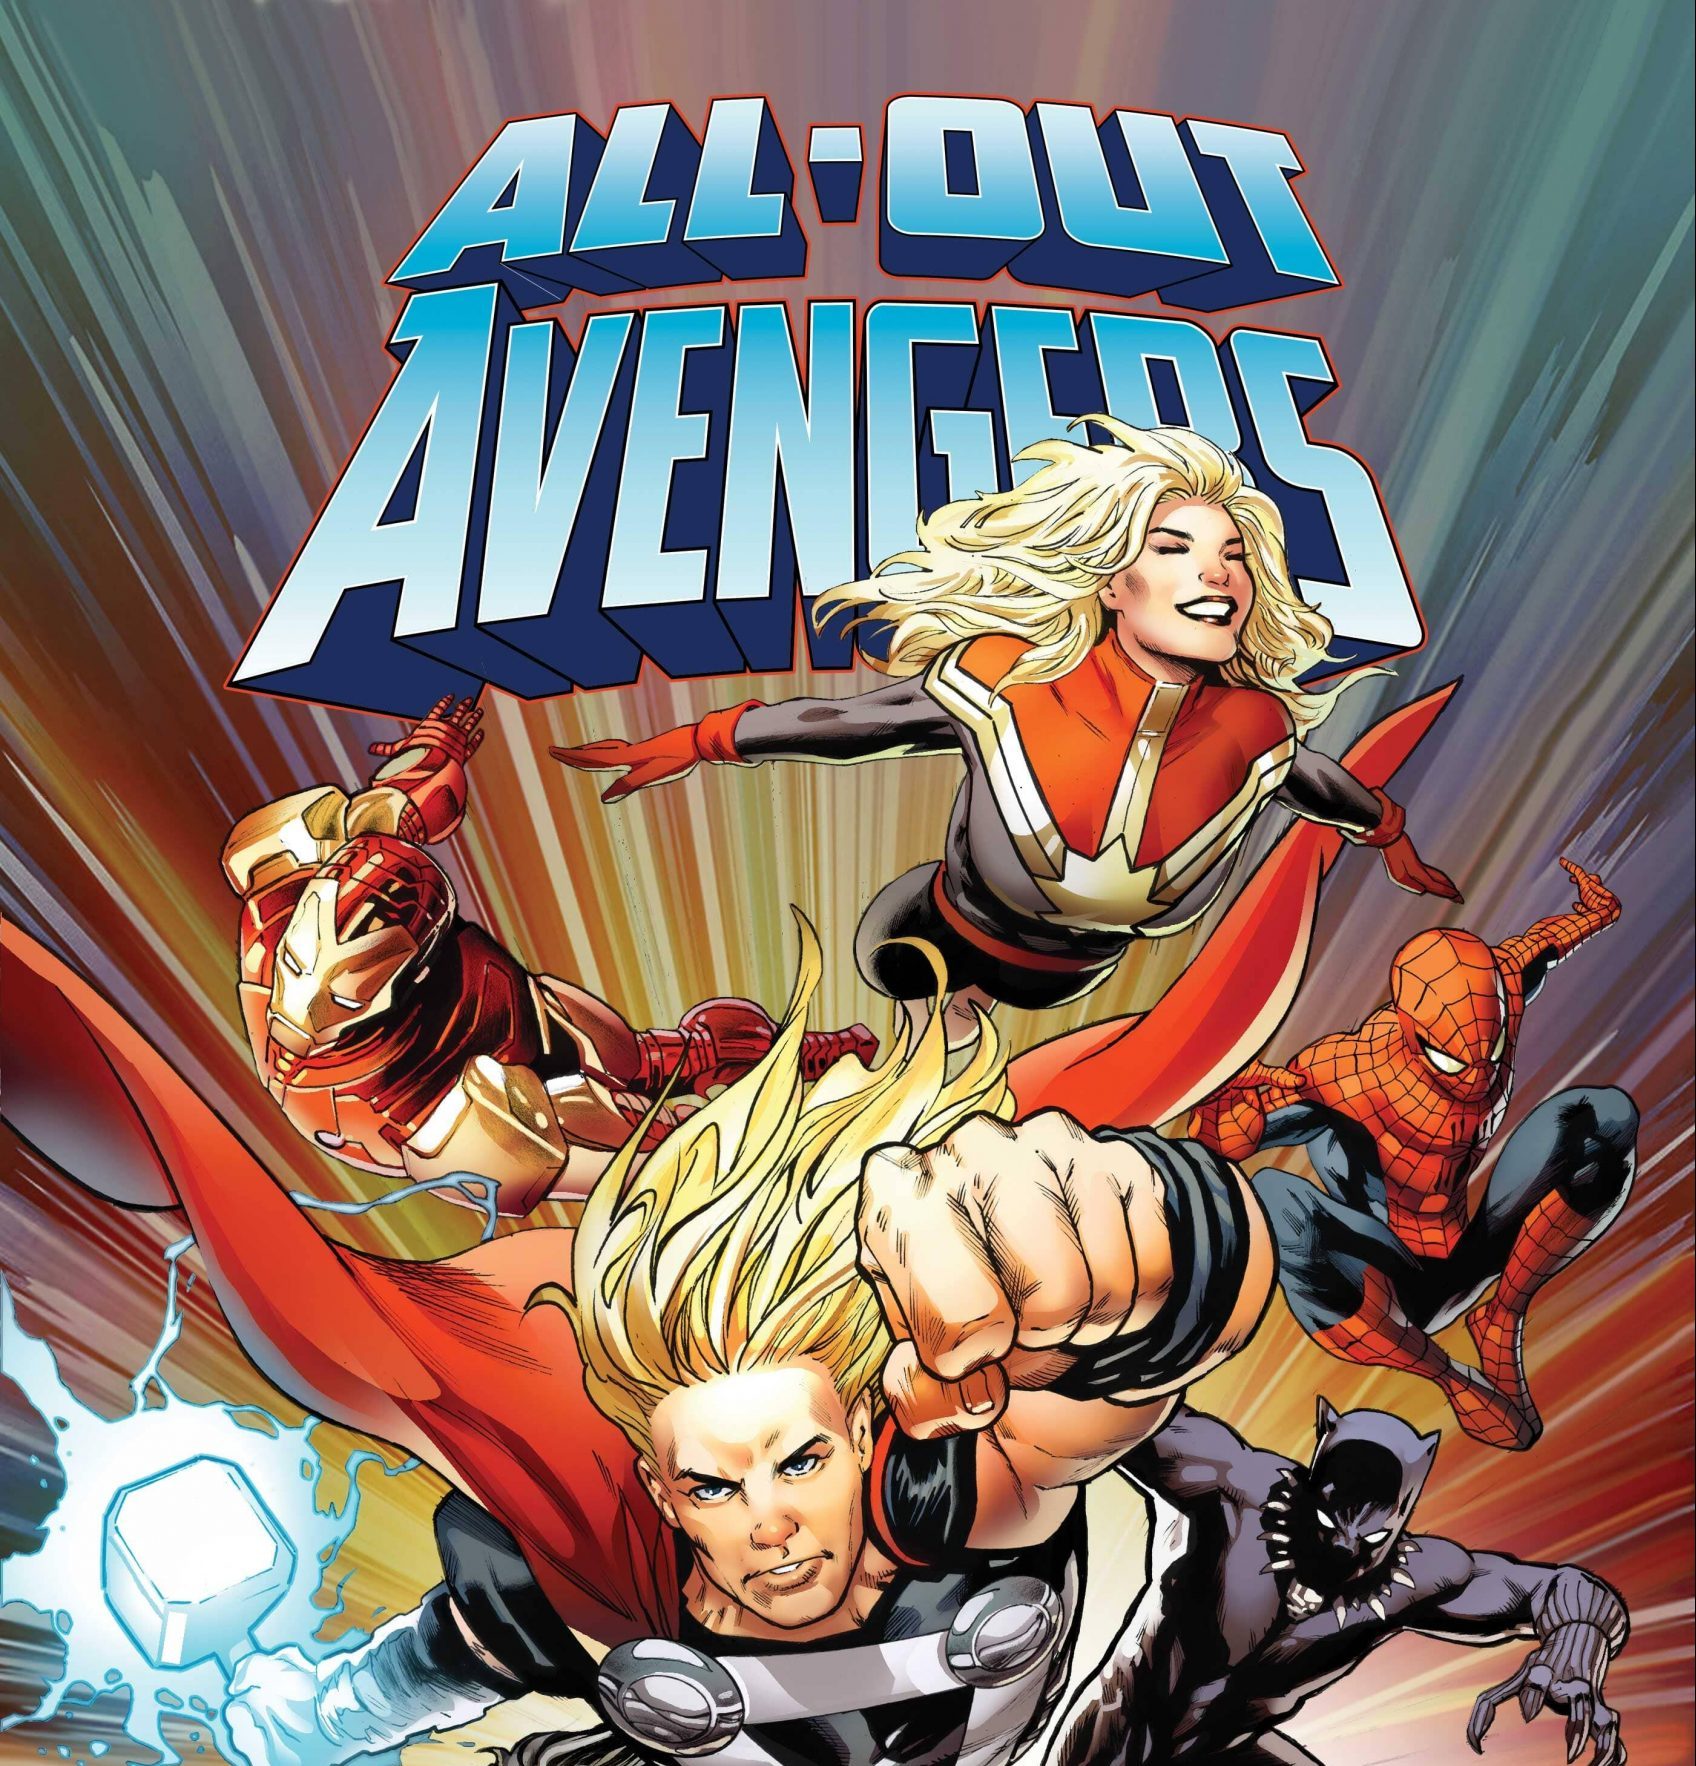 'All-Out Avengers' #1 delivers on its title and then some